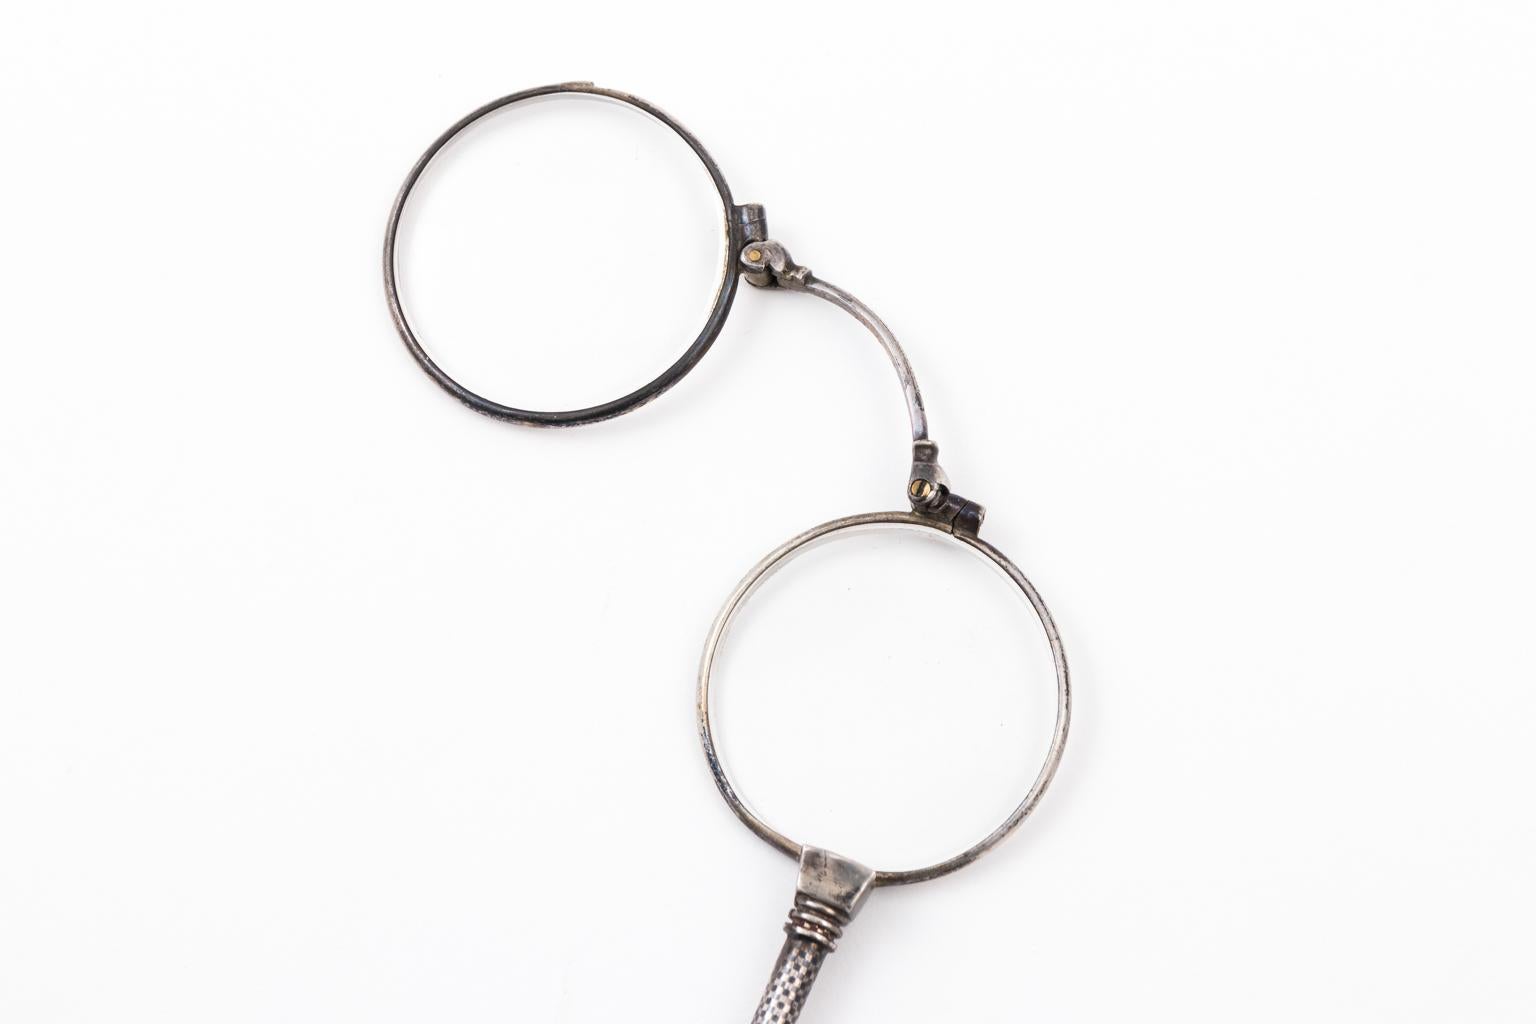 Circa late 19th century 800 Silver lorgnette on an 800 Silver chain. When you pull down the slide on the Lorgnette, the glasses open. The Lorgnette measures 6.50 Inches long. The chain is 30 Inches total. The chain is 2.50 Millimeters wide, the